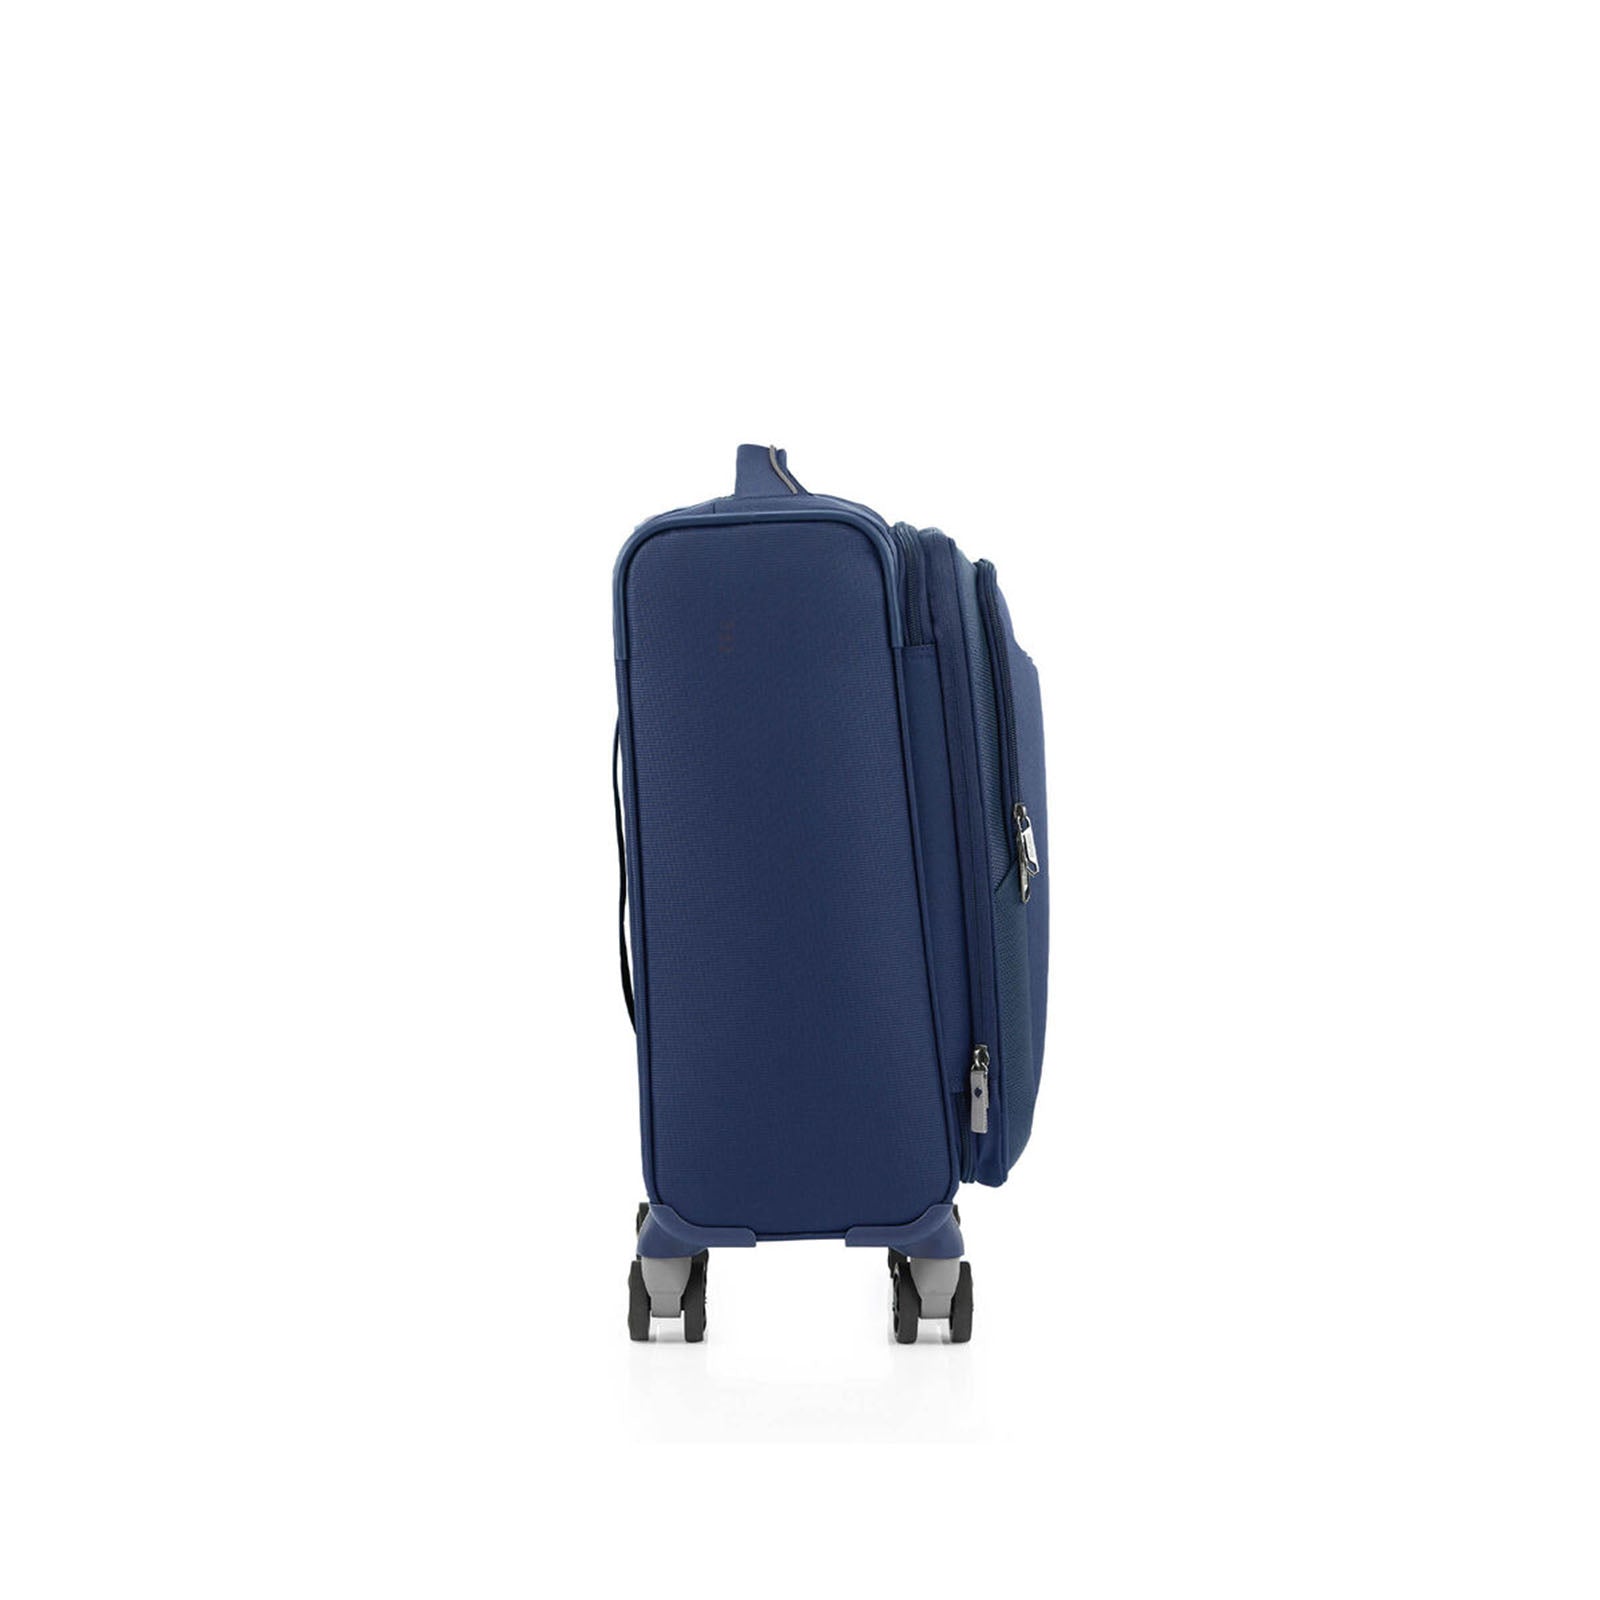 American-Tourister-Applite-4-Eco-55cm-Carry-On-Suitcase-Navy-Side